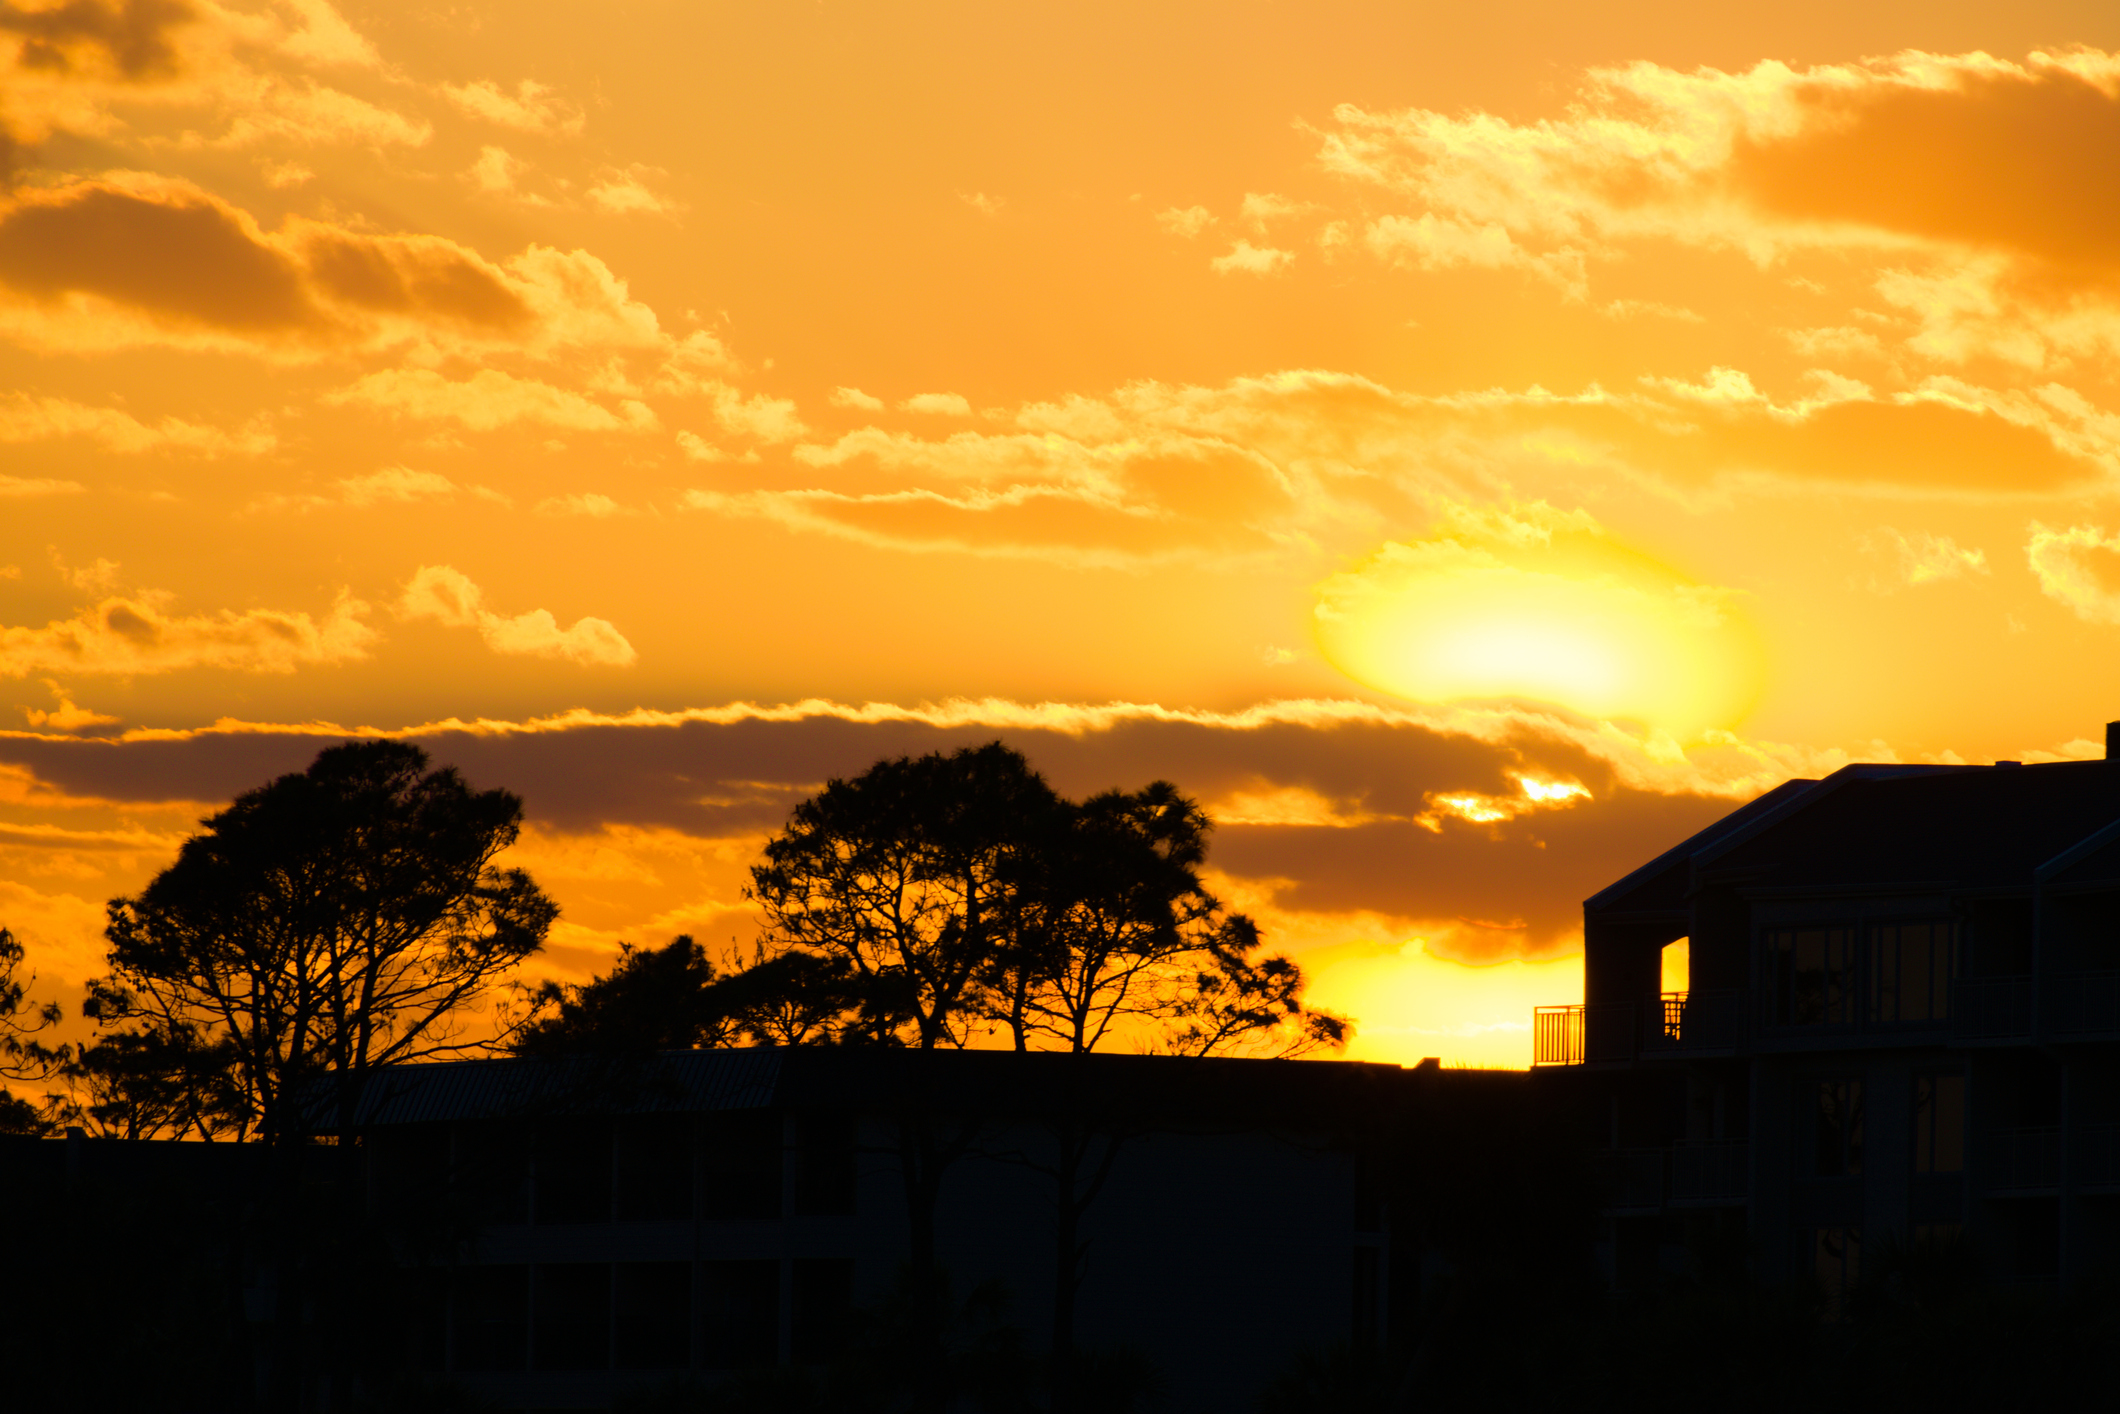 Landscape. Silhouette of trees and houses under beautiful sunset sky. Created in Hilton Head, SC. 03/21/2018